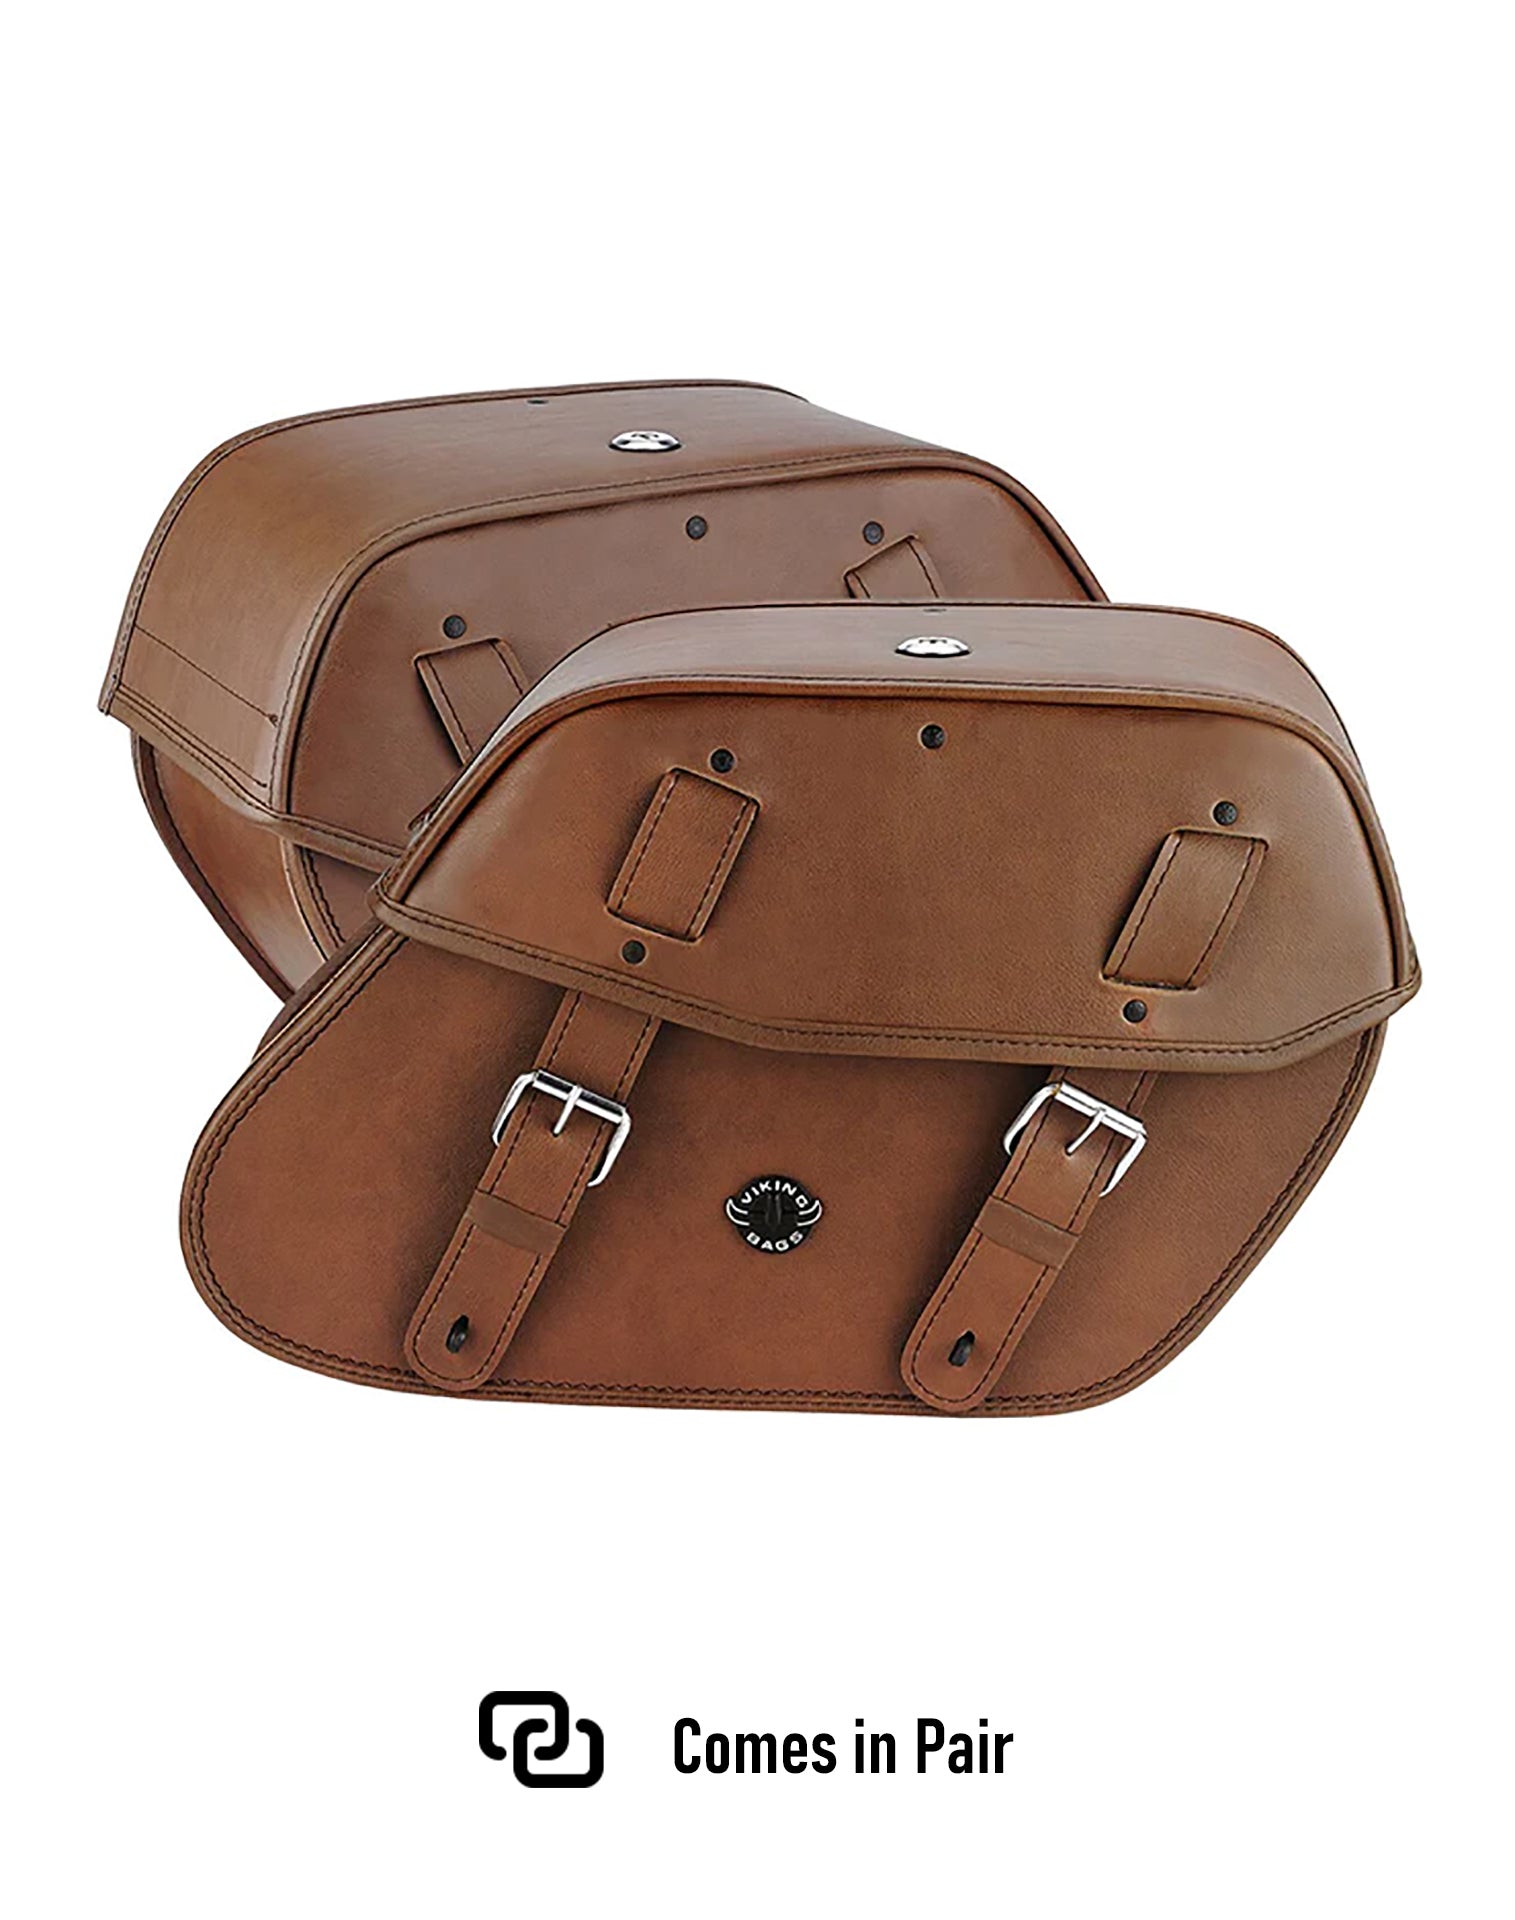 Viking Odin Brown Large Suzuki Volusia 800 Leather Motorcycle Saddlebags Weather Resistant Bags Comes in Pair